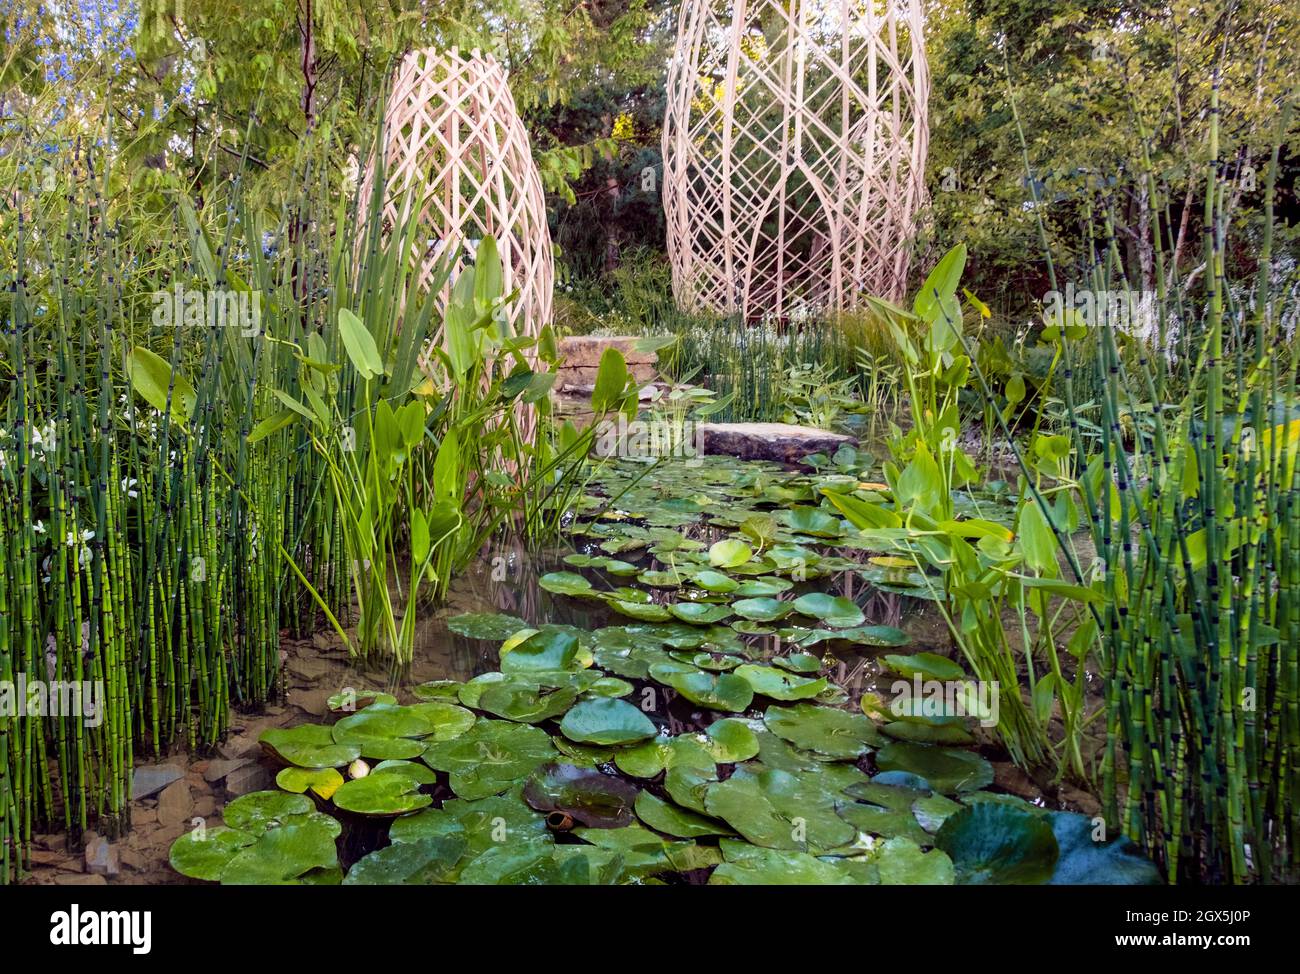 The Guangzhou China garden display at the Chelsea Flower Show 2021 in London. Stock Photo